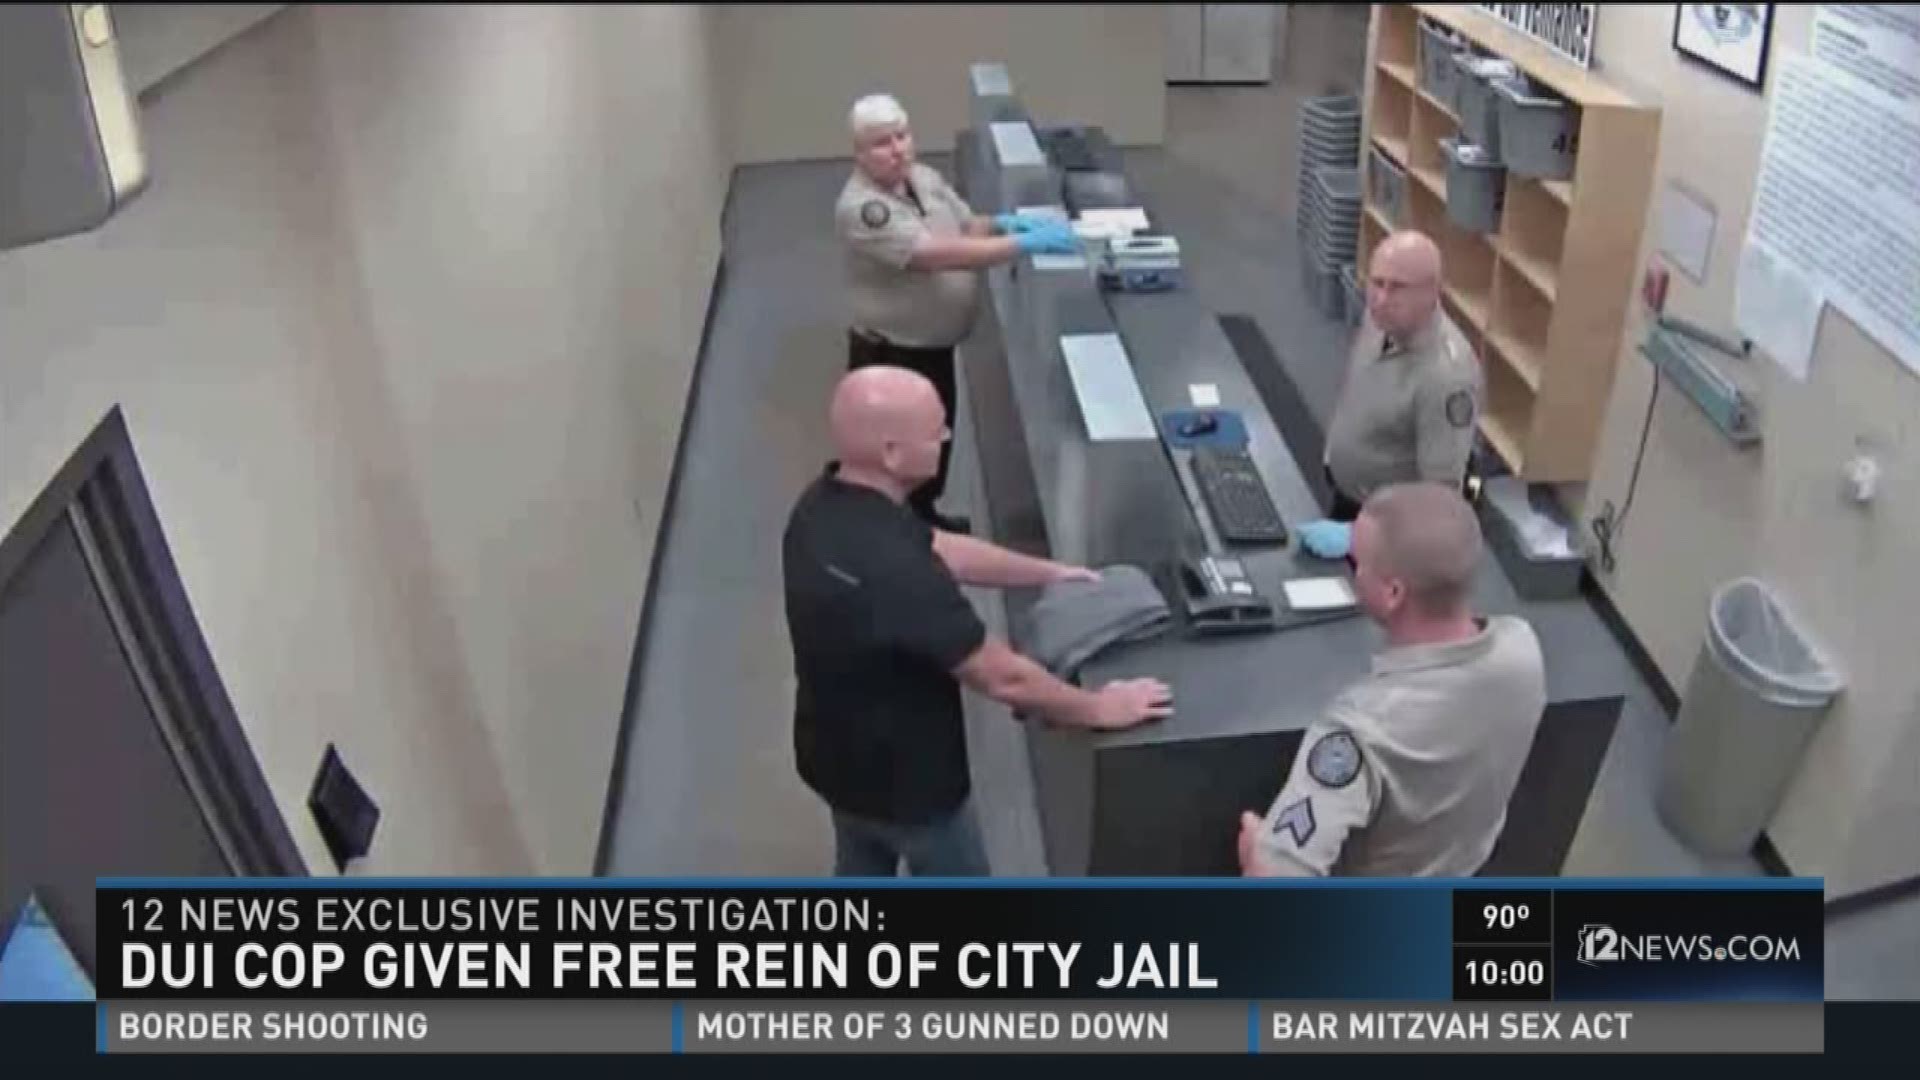 DUI cop given free rein of city jail.